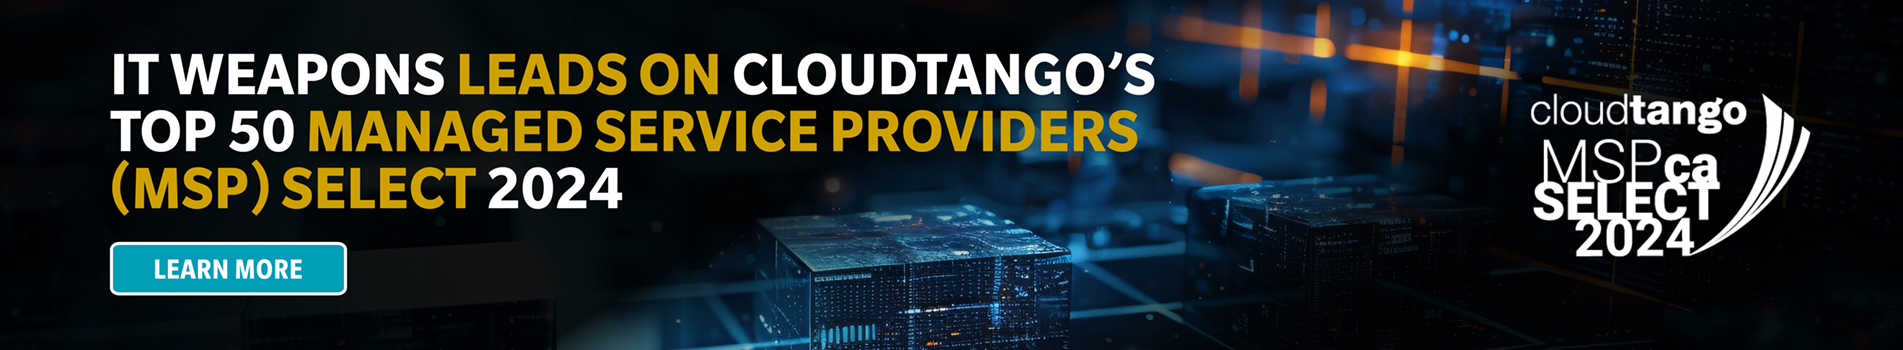 IT Weapons Leads on Cloudtango’s Top 50 Managed Service Providers (MSP) Select 2024 